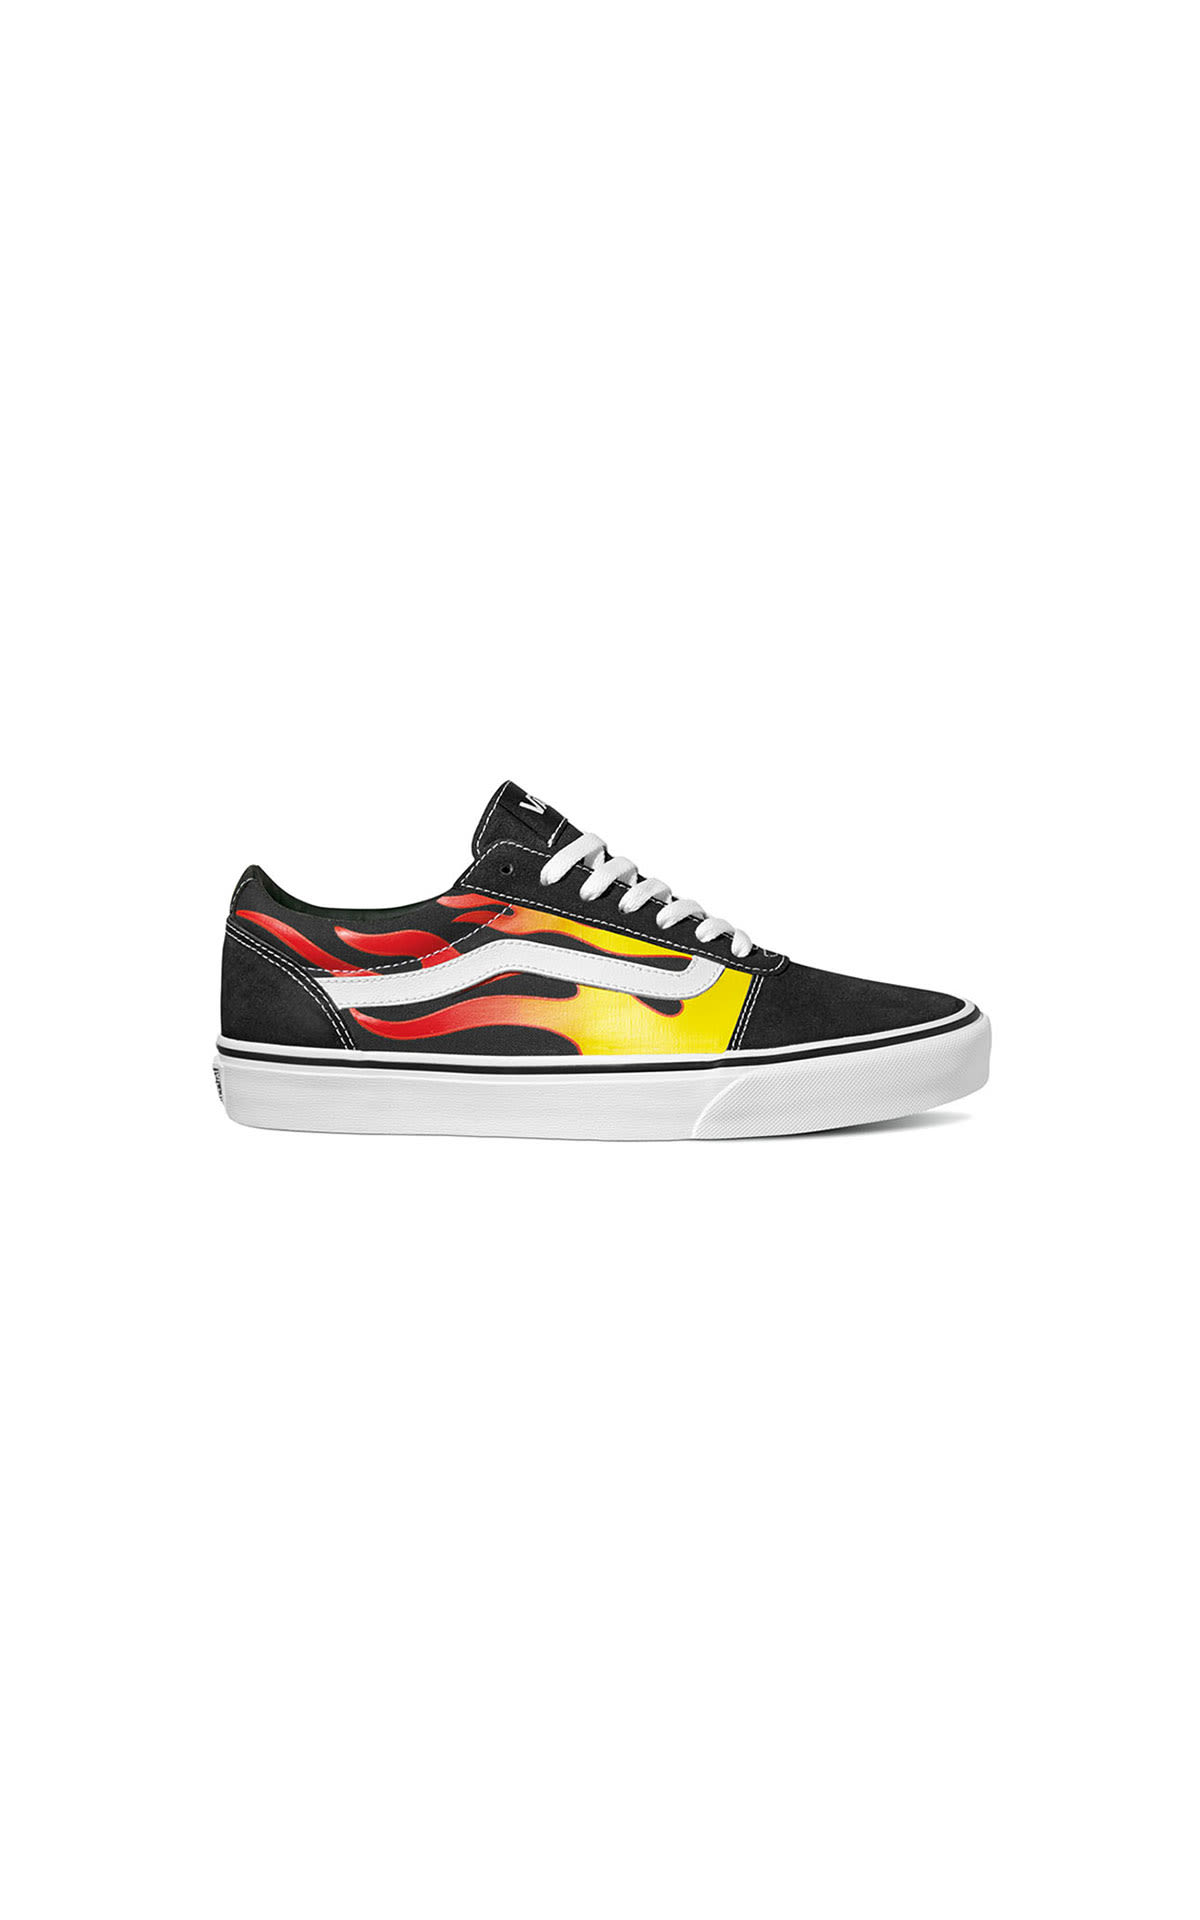 Vans Old skool flame trainers from Bicester Village